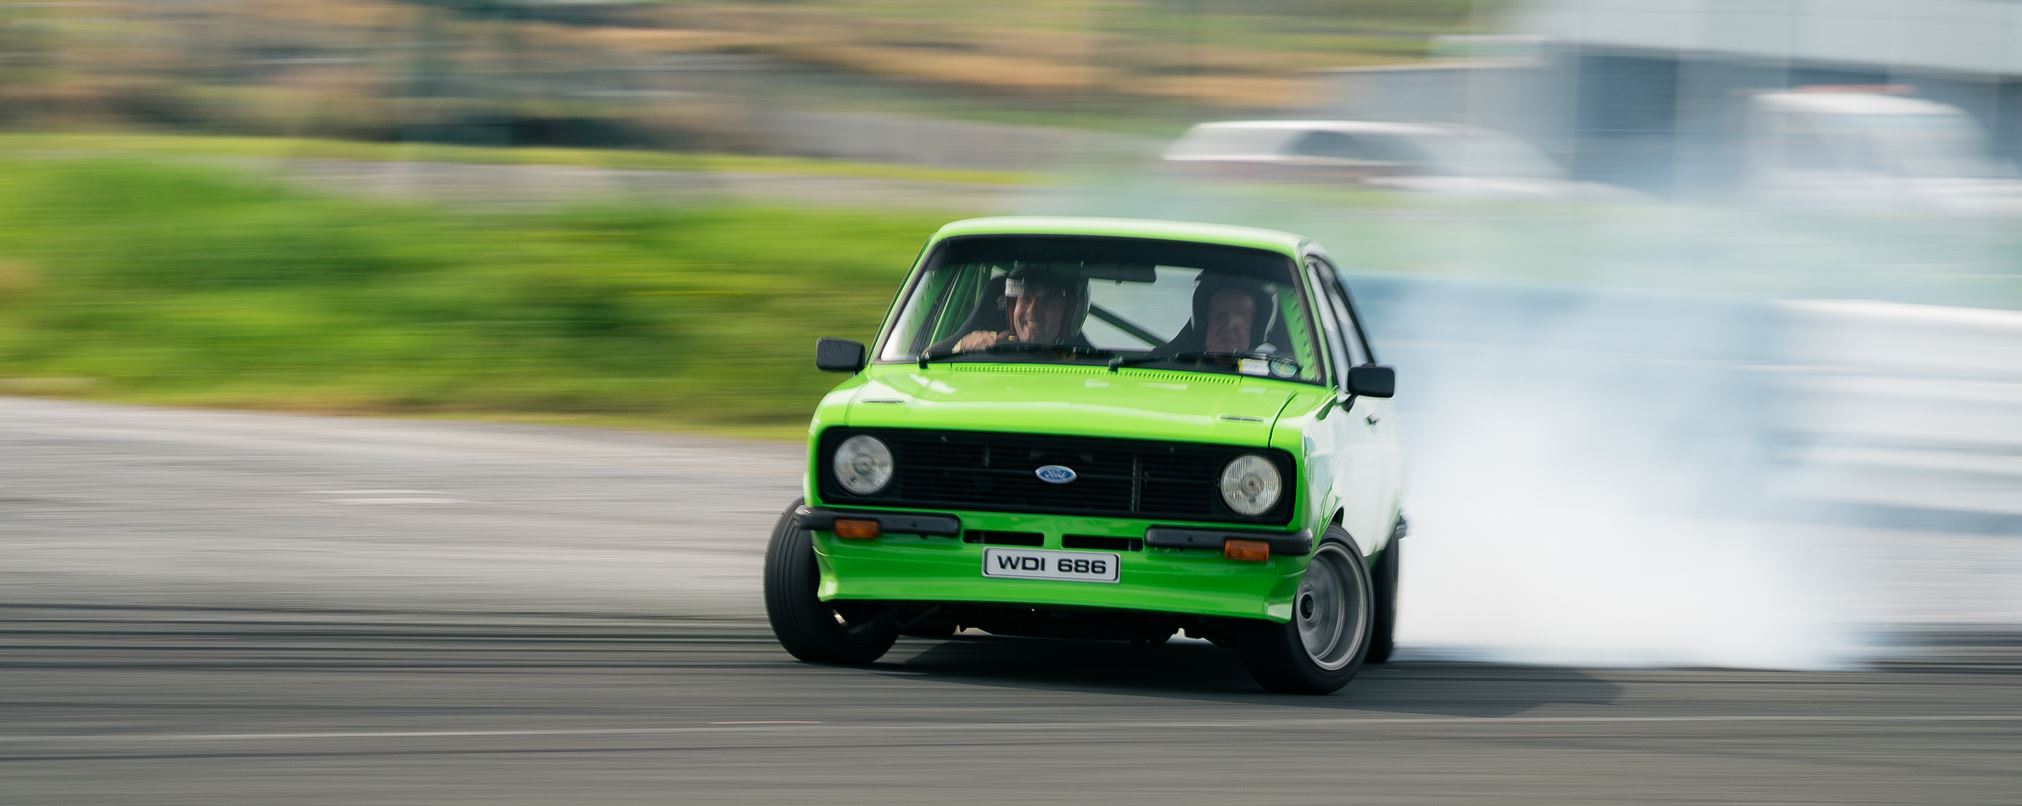 A green MKII escort drifting on a track with tyre smoke